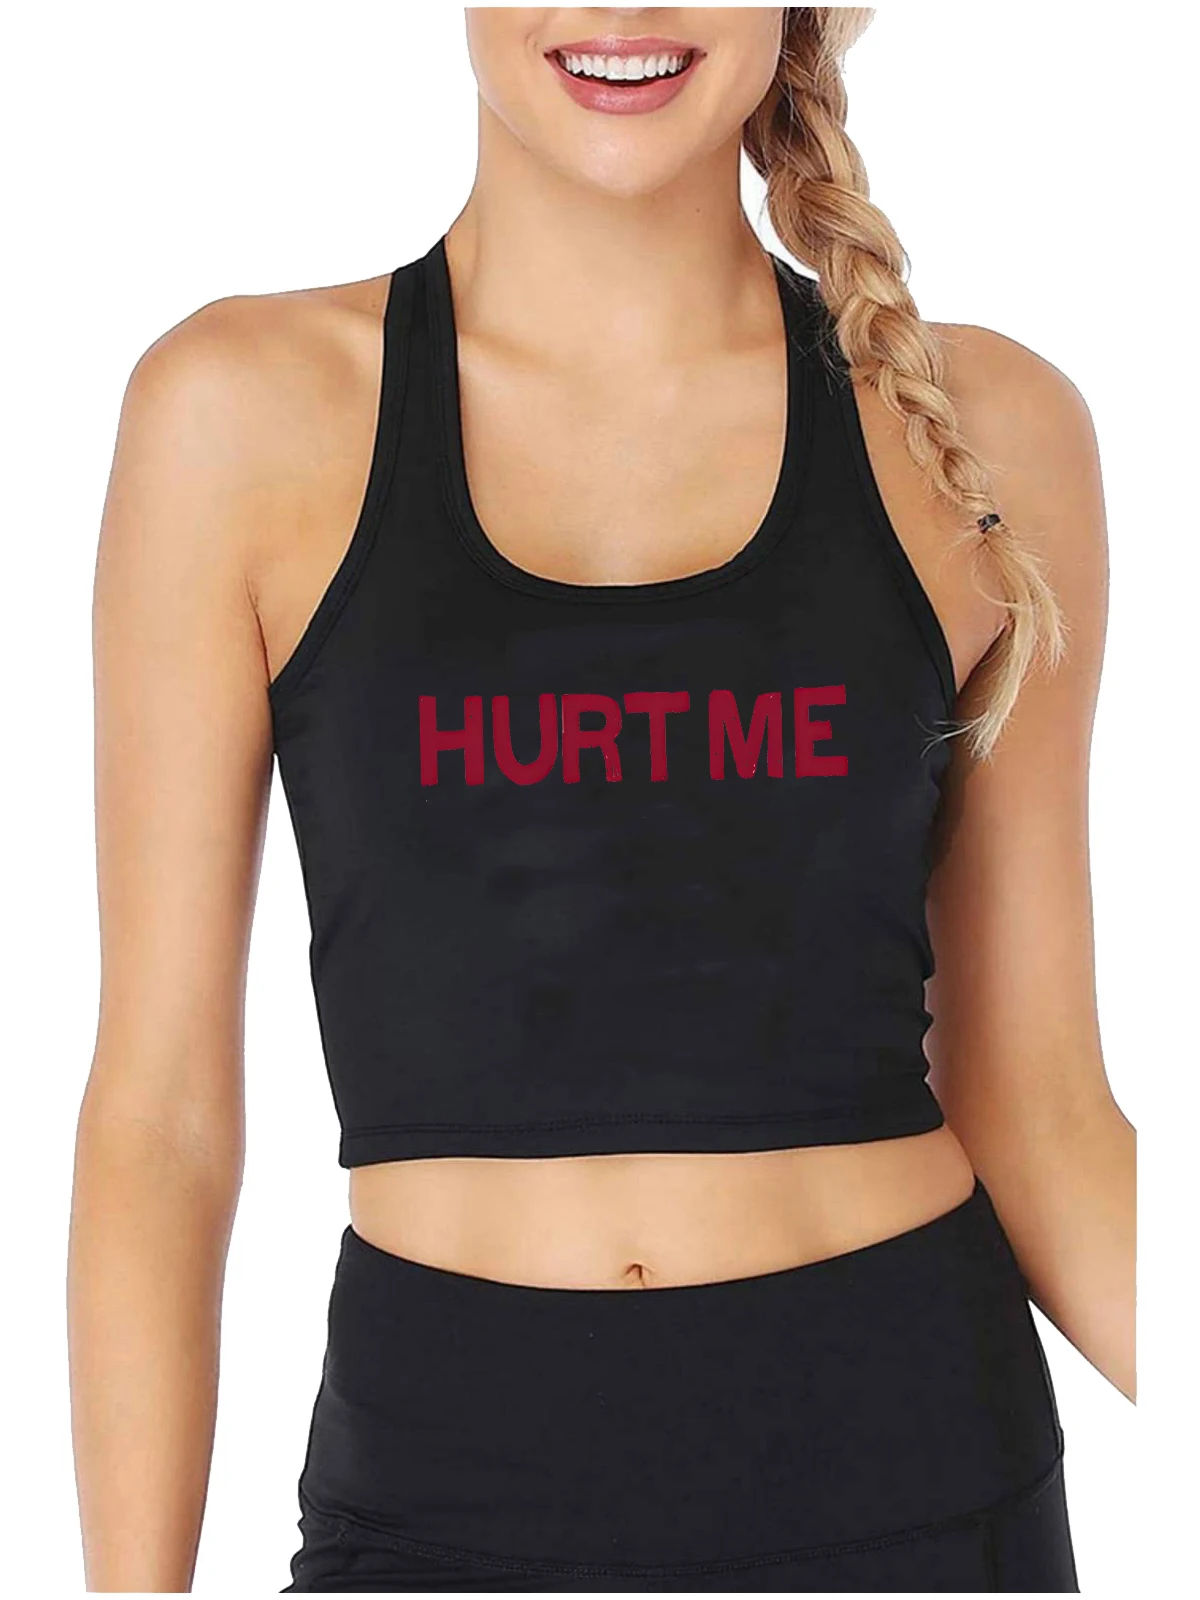 

Hurt Me Design Sexy Slim Fit Crop Top Hotwife Humorous Fun Flirty Submissive Style Tank Tops Swinger Naughty Training Camisole